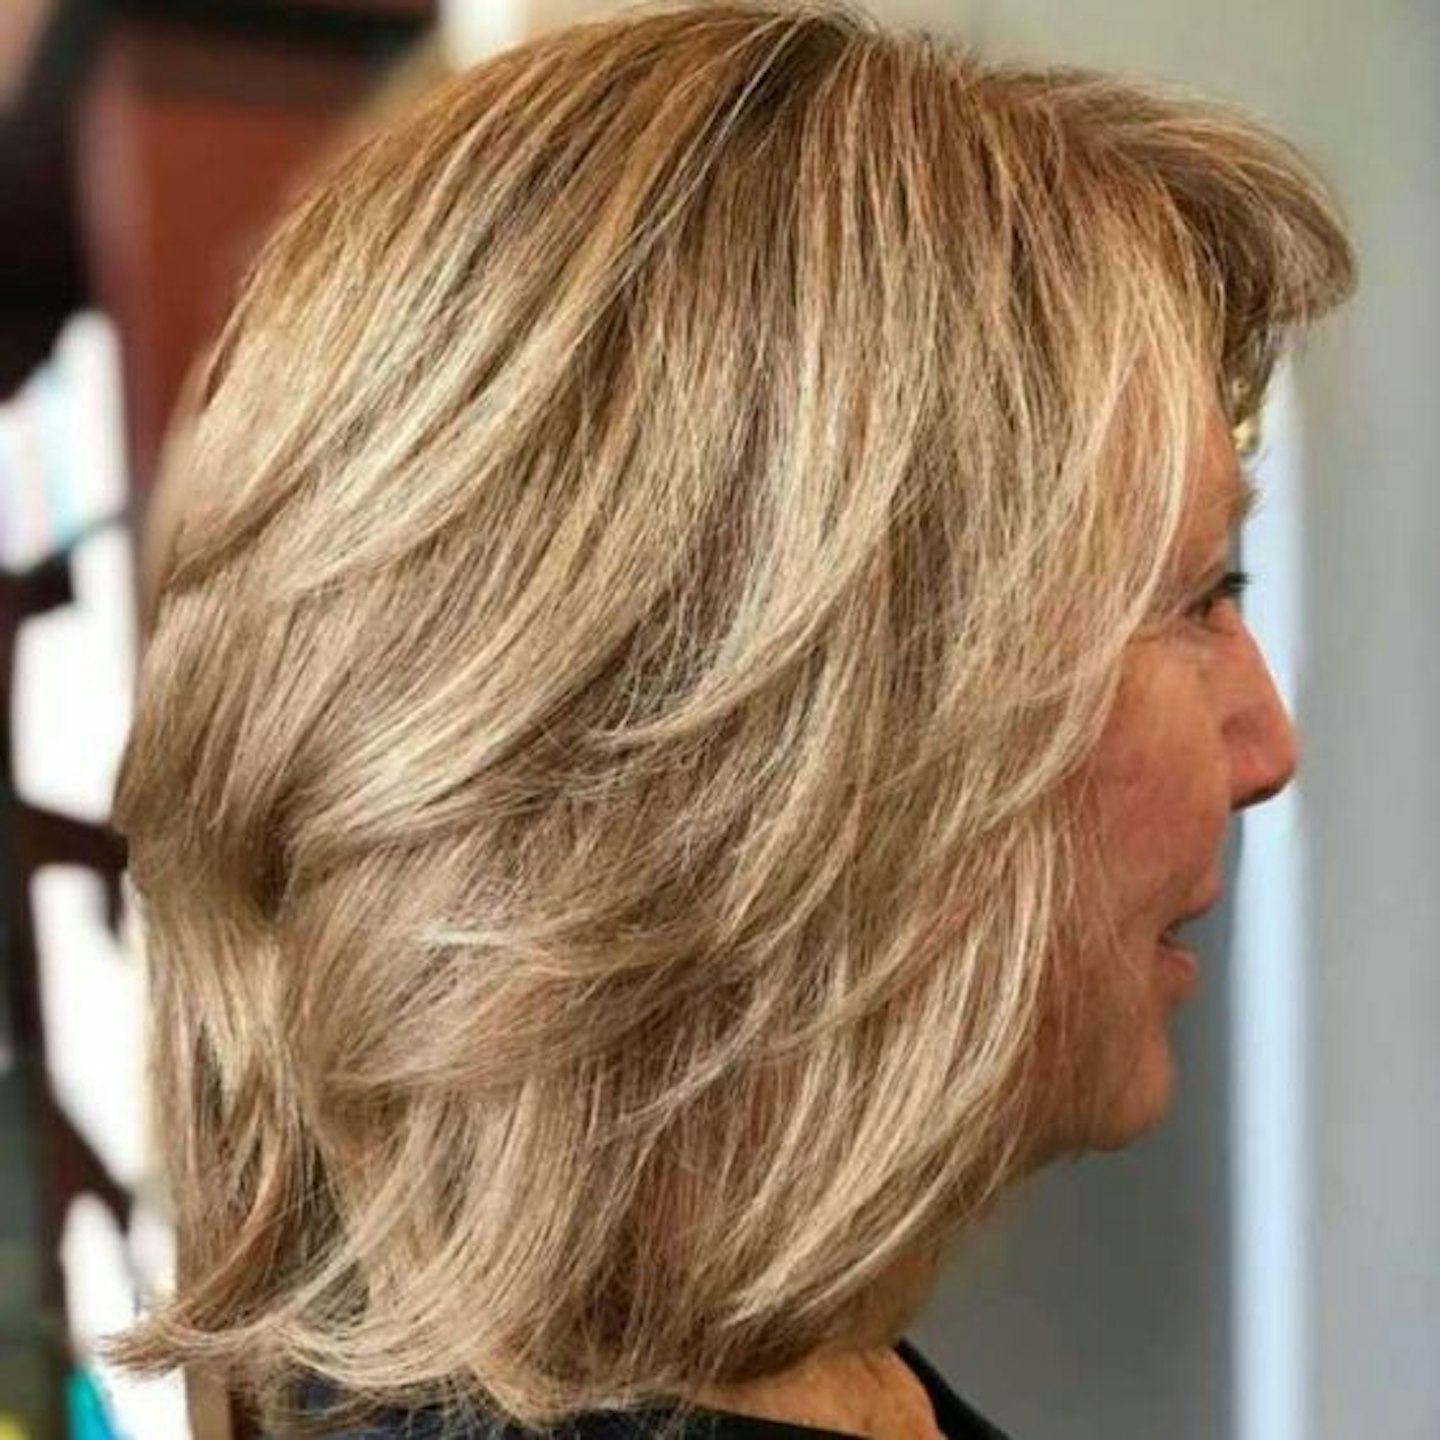 Hairstyles For Women Over 60